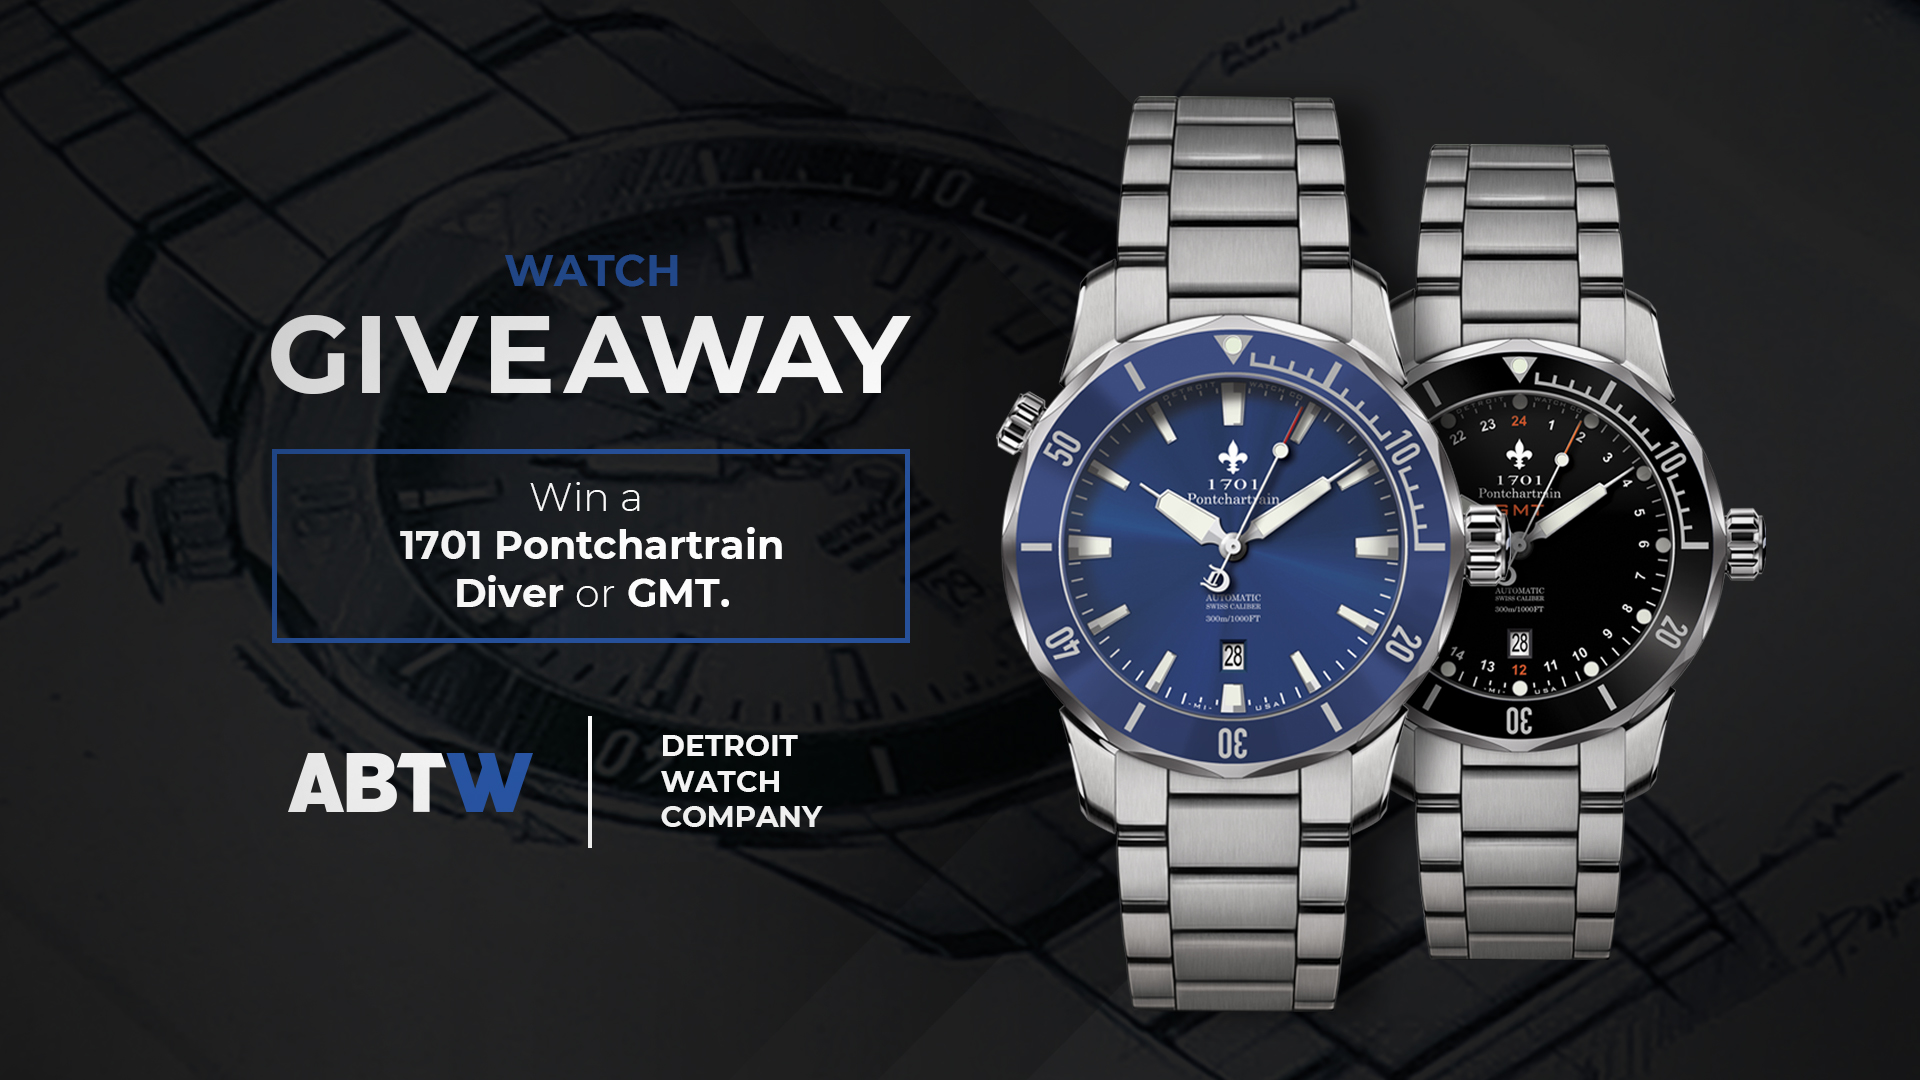 WATCH GIVEAWAY: Detroit Watch Co. 1701 Pontchartrain Great Lakes Edition Diver Or GMT Diver